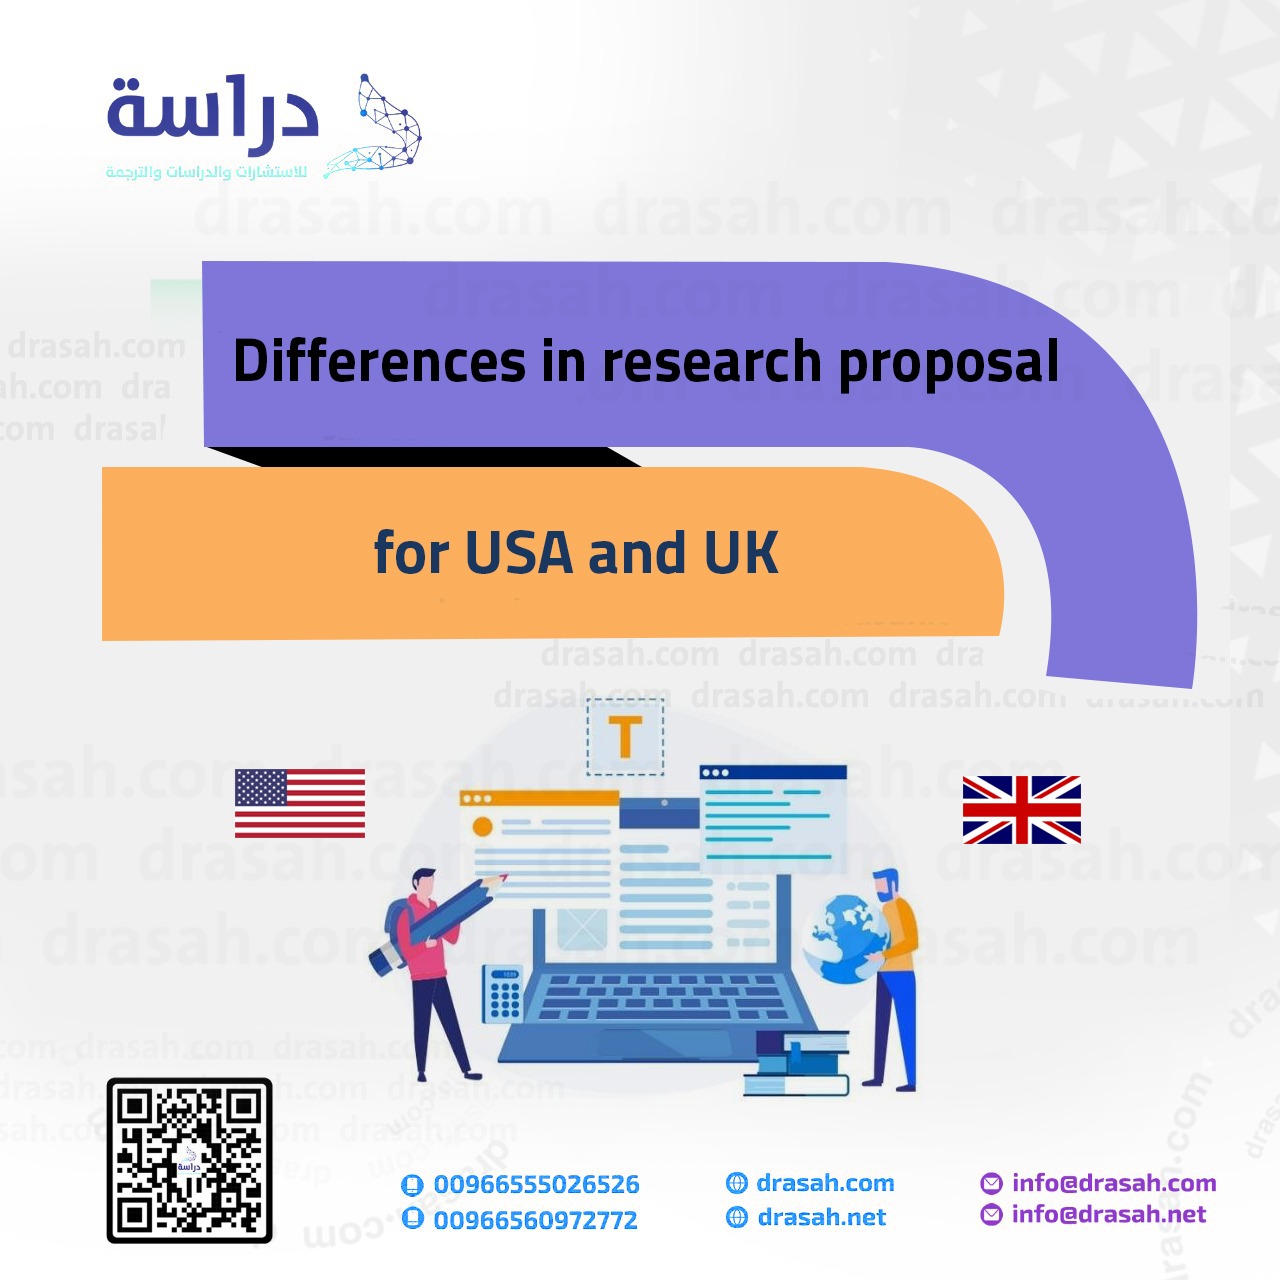 Differences in research proposal for USA and UK